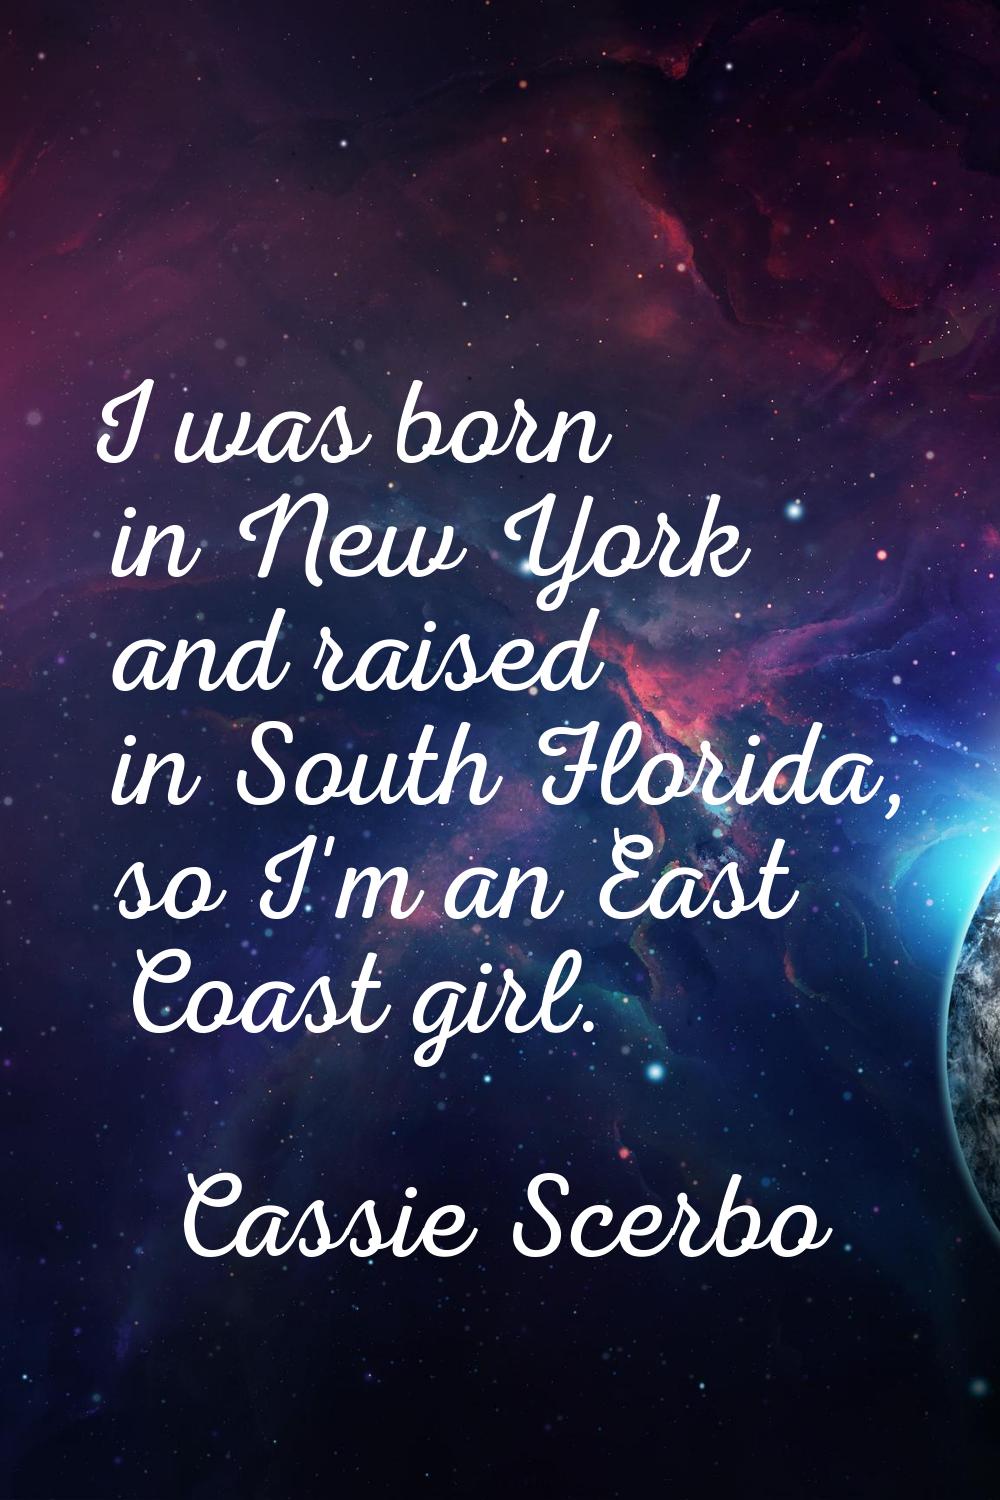 I was born in New York and raised in South Florida, so I'm an East Coast girl.